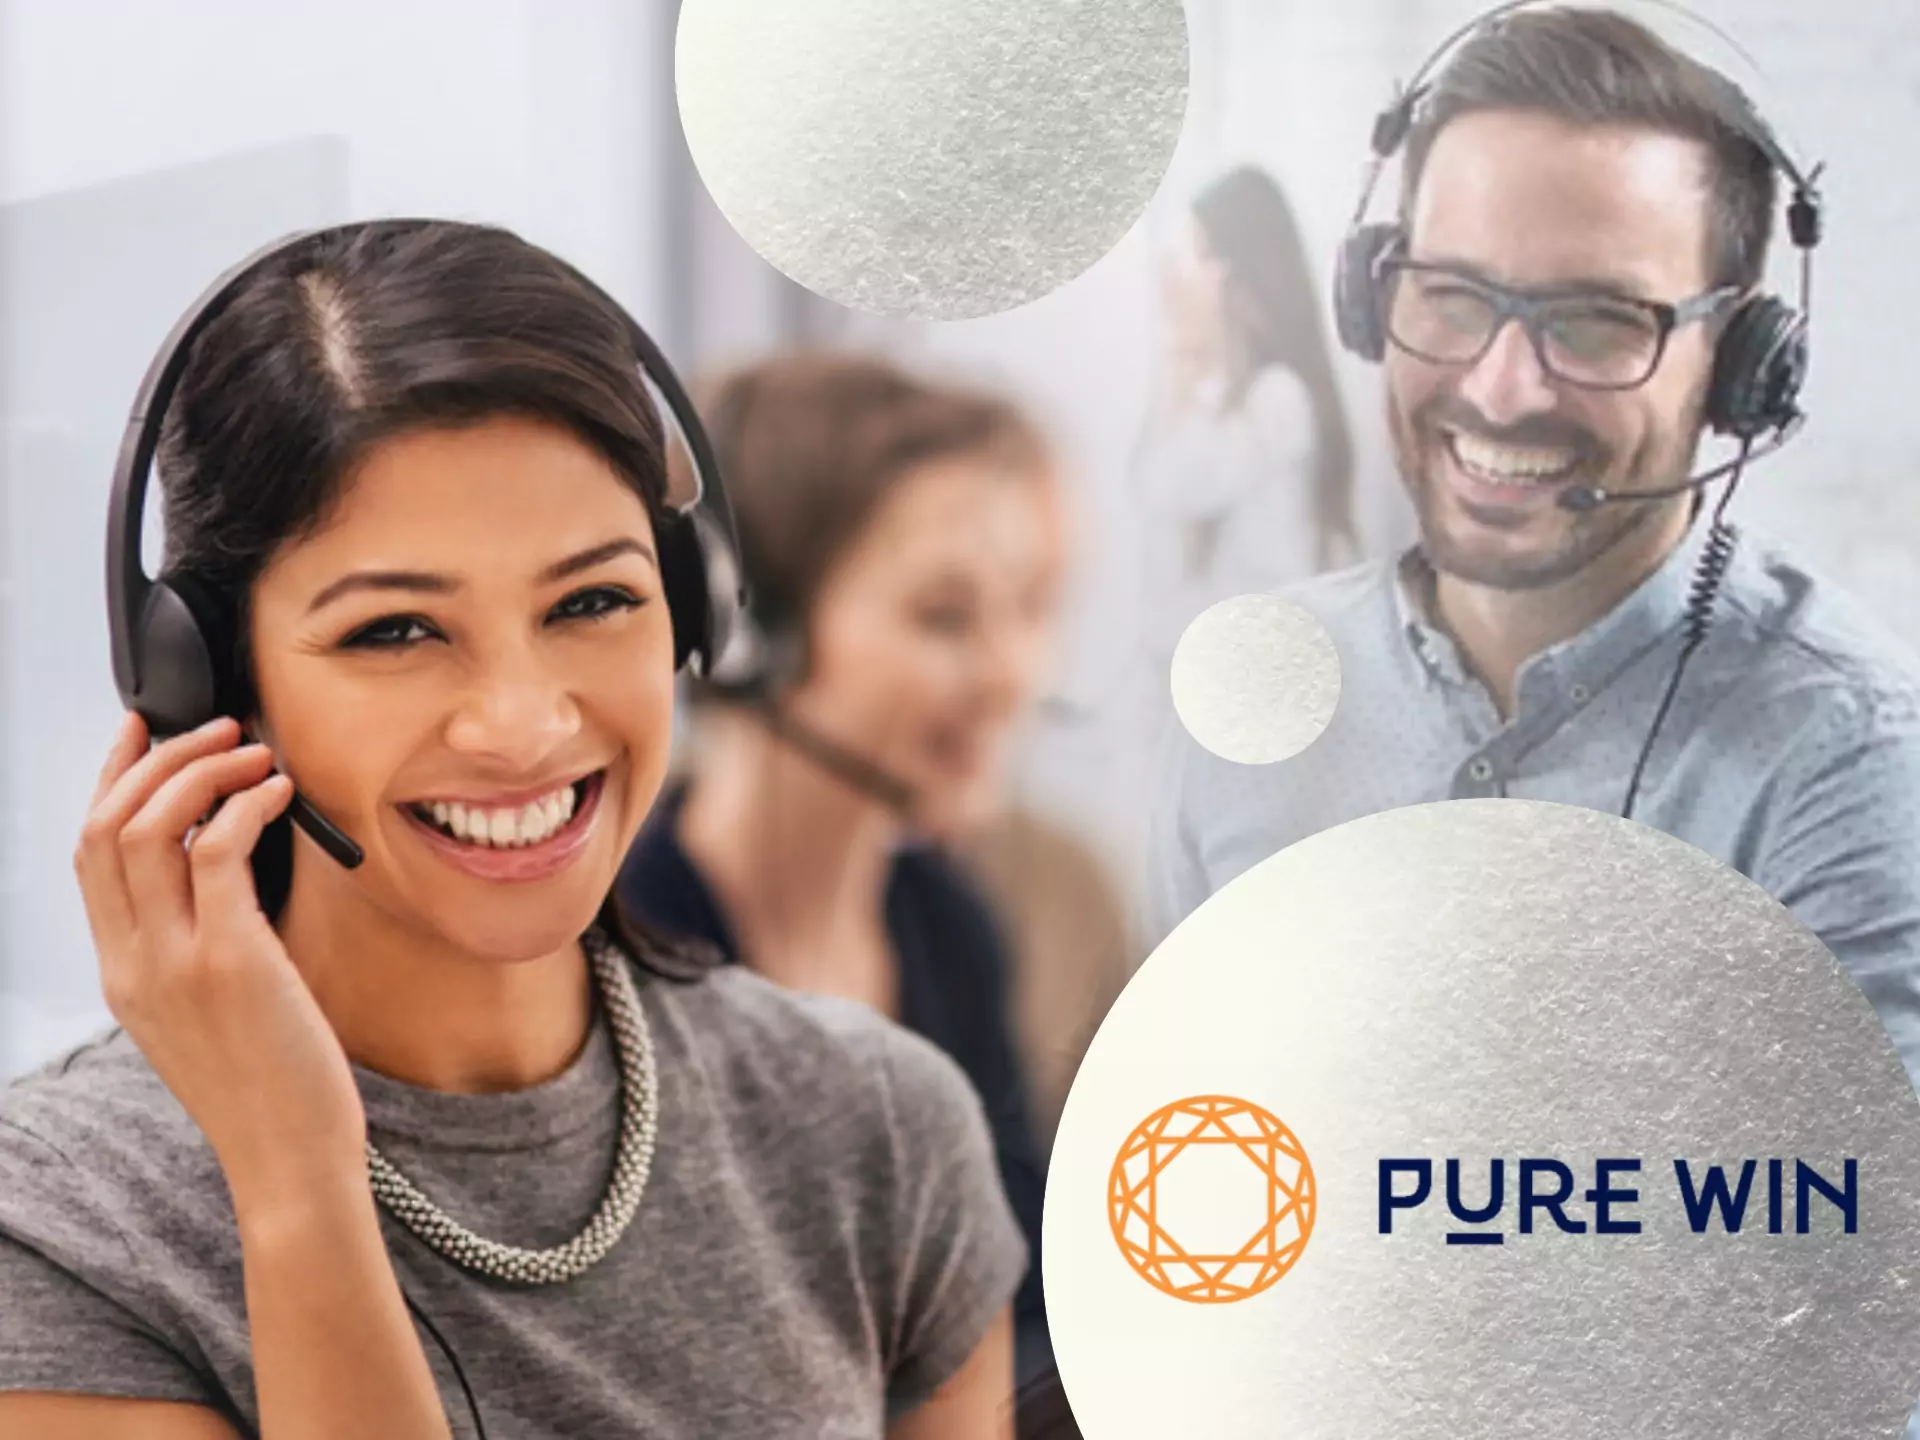 You can contact Pure Win's support team whenever you have a betting-related question.